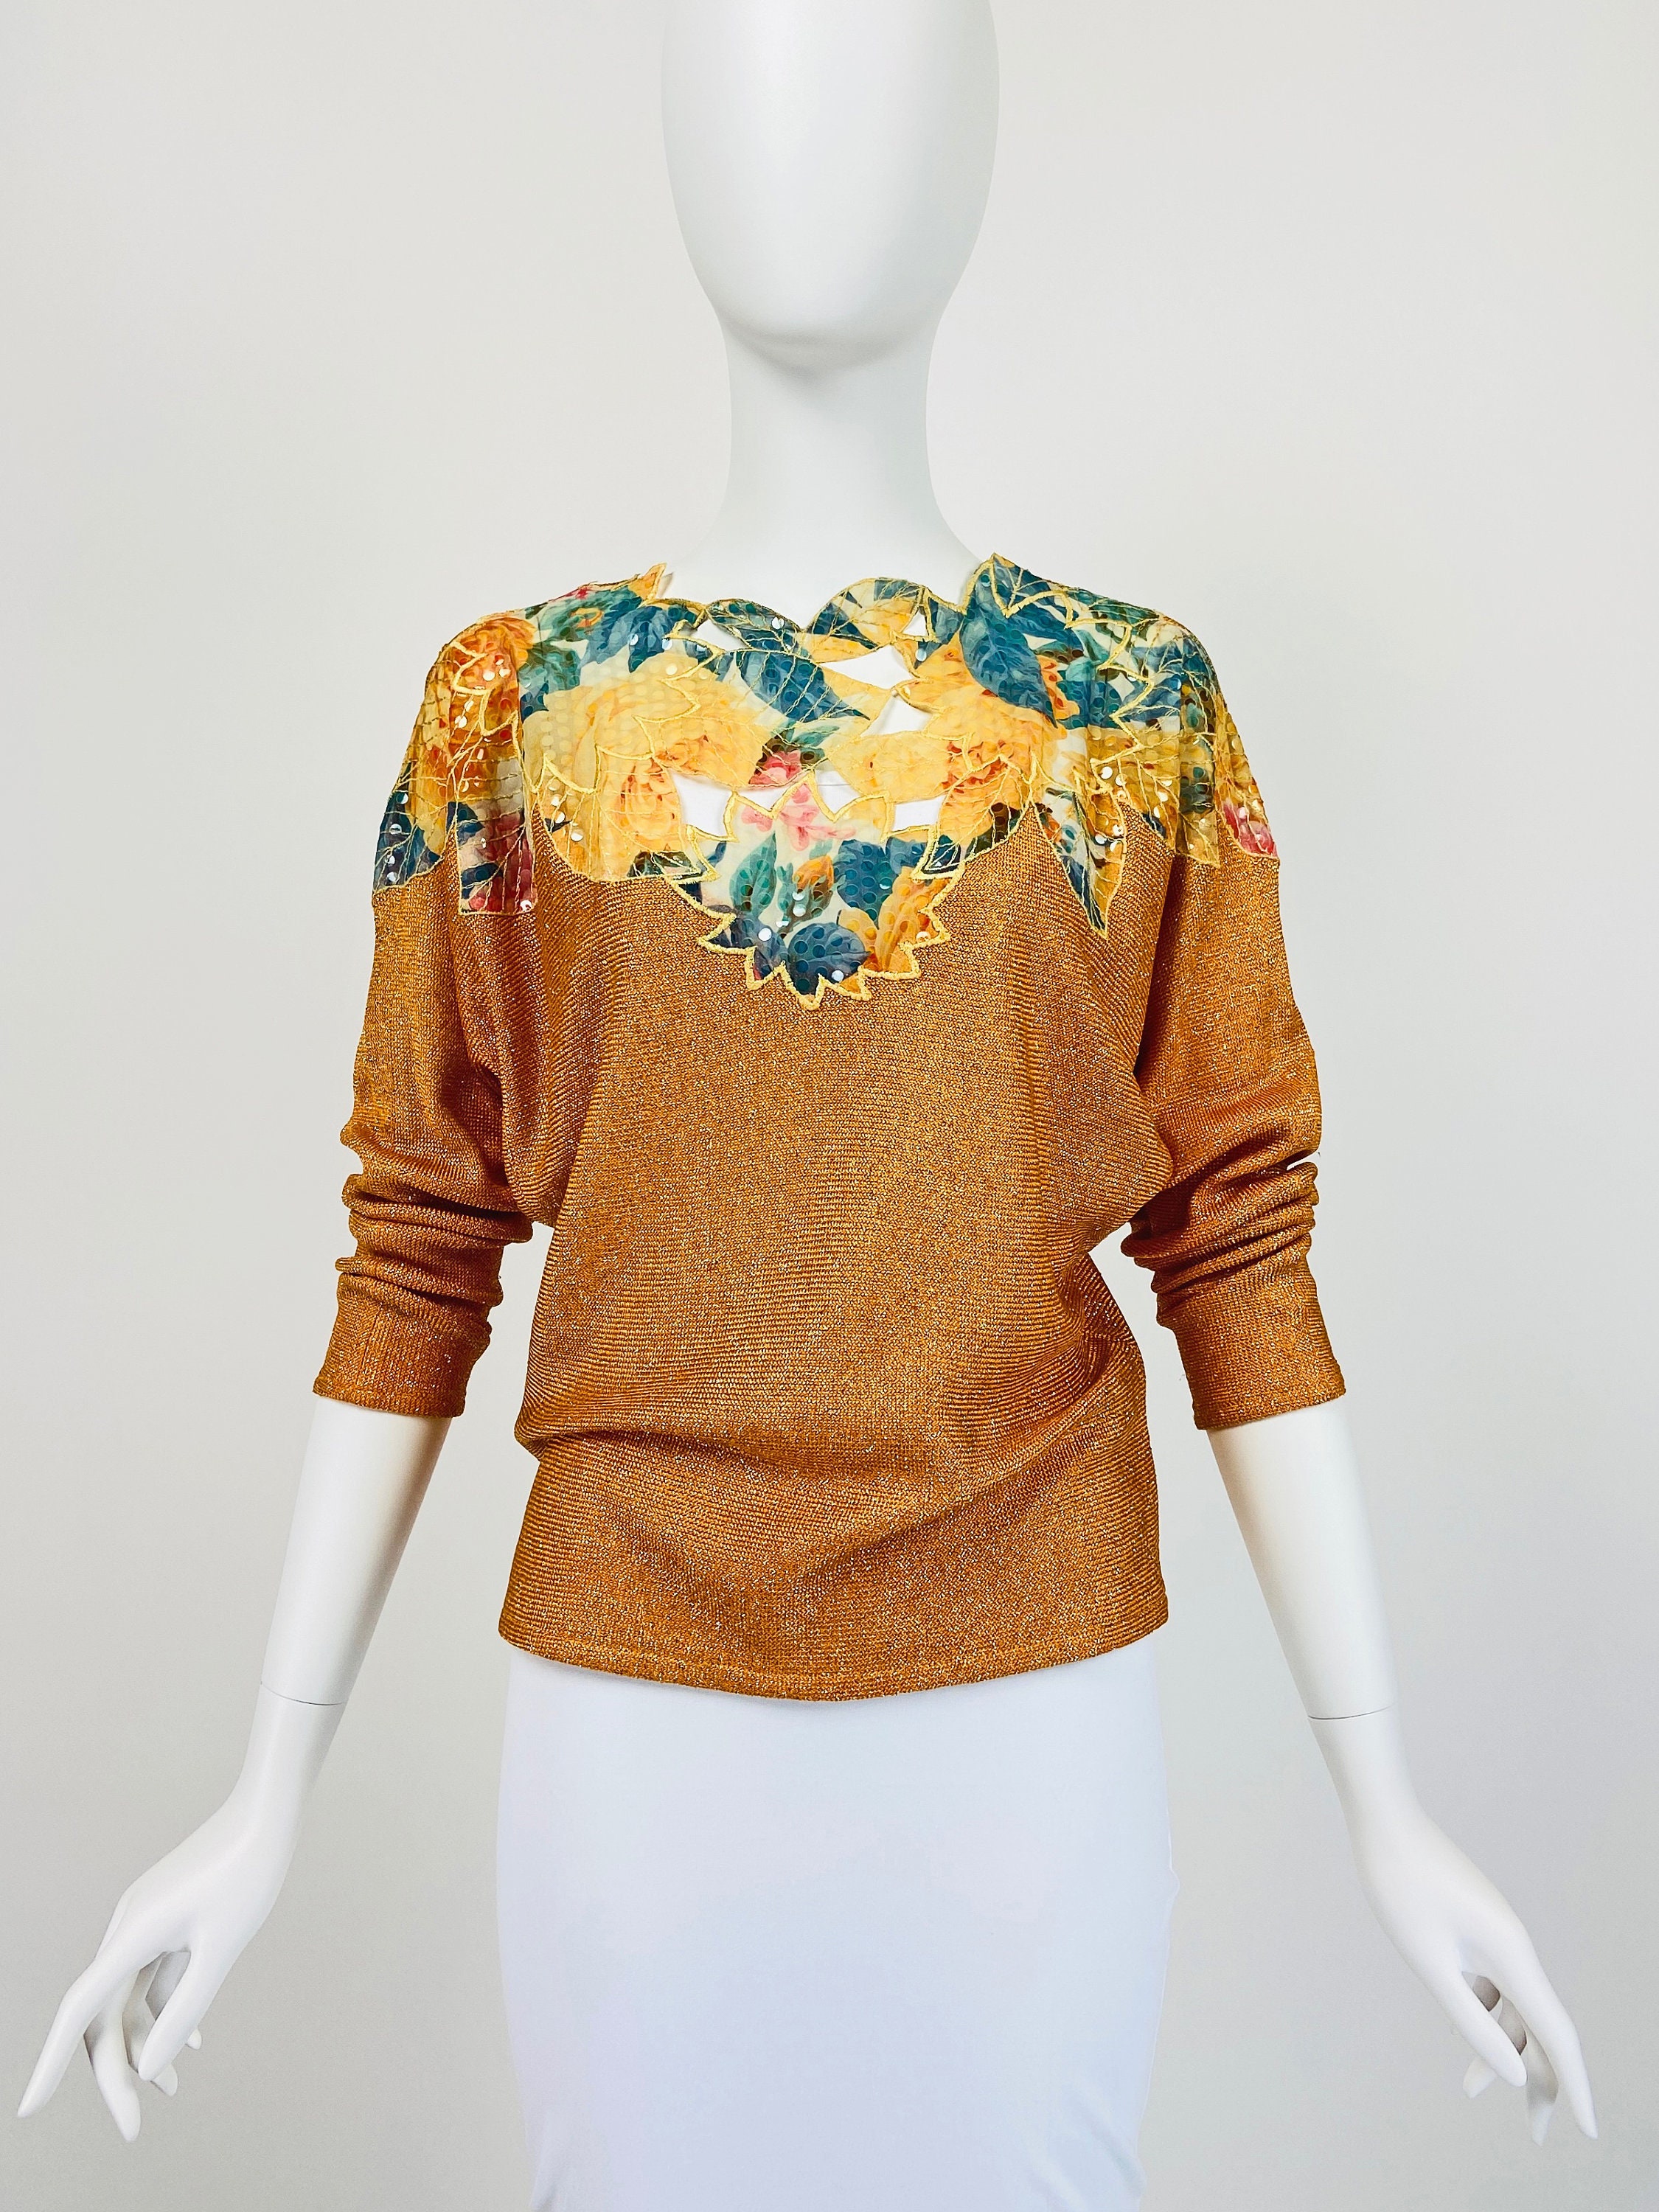 Vintage 80S Top, Sequin Dolman Sleeve Knit Floral Metallic Gold Laurence Corsin, Small Size 4 6 Us, 8 10 Uk W437